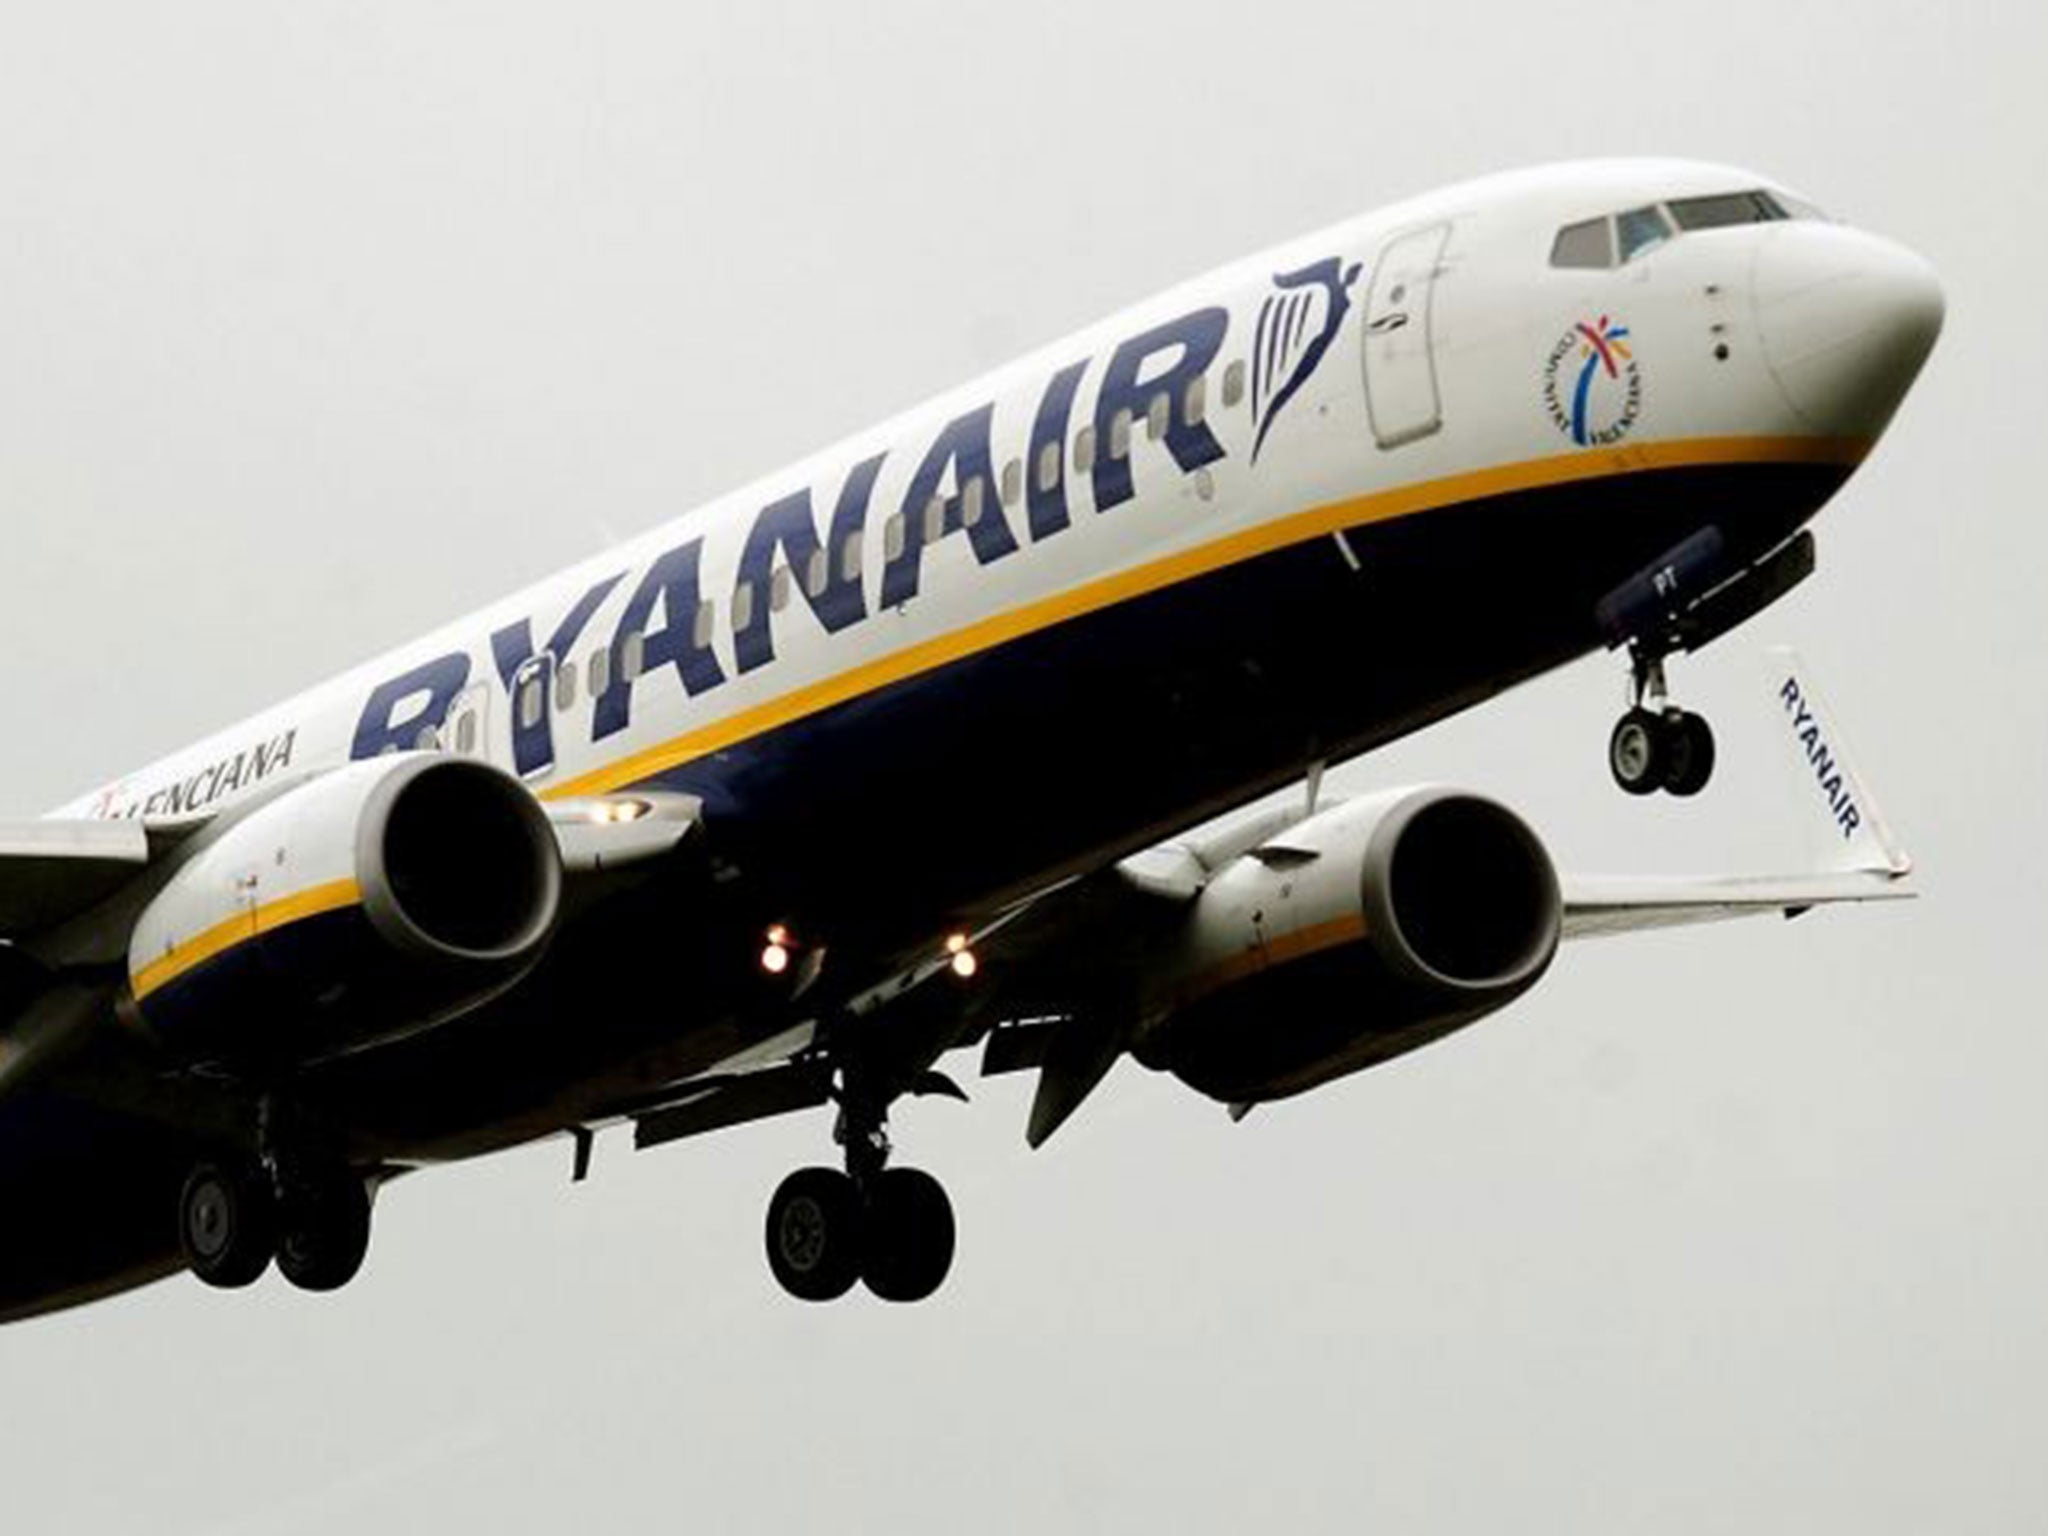 Ryanair has reported a 157% rise in profits since implementing staff politeness